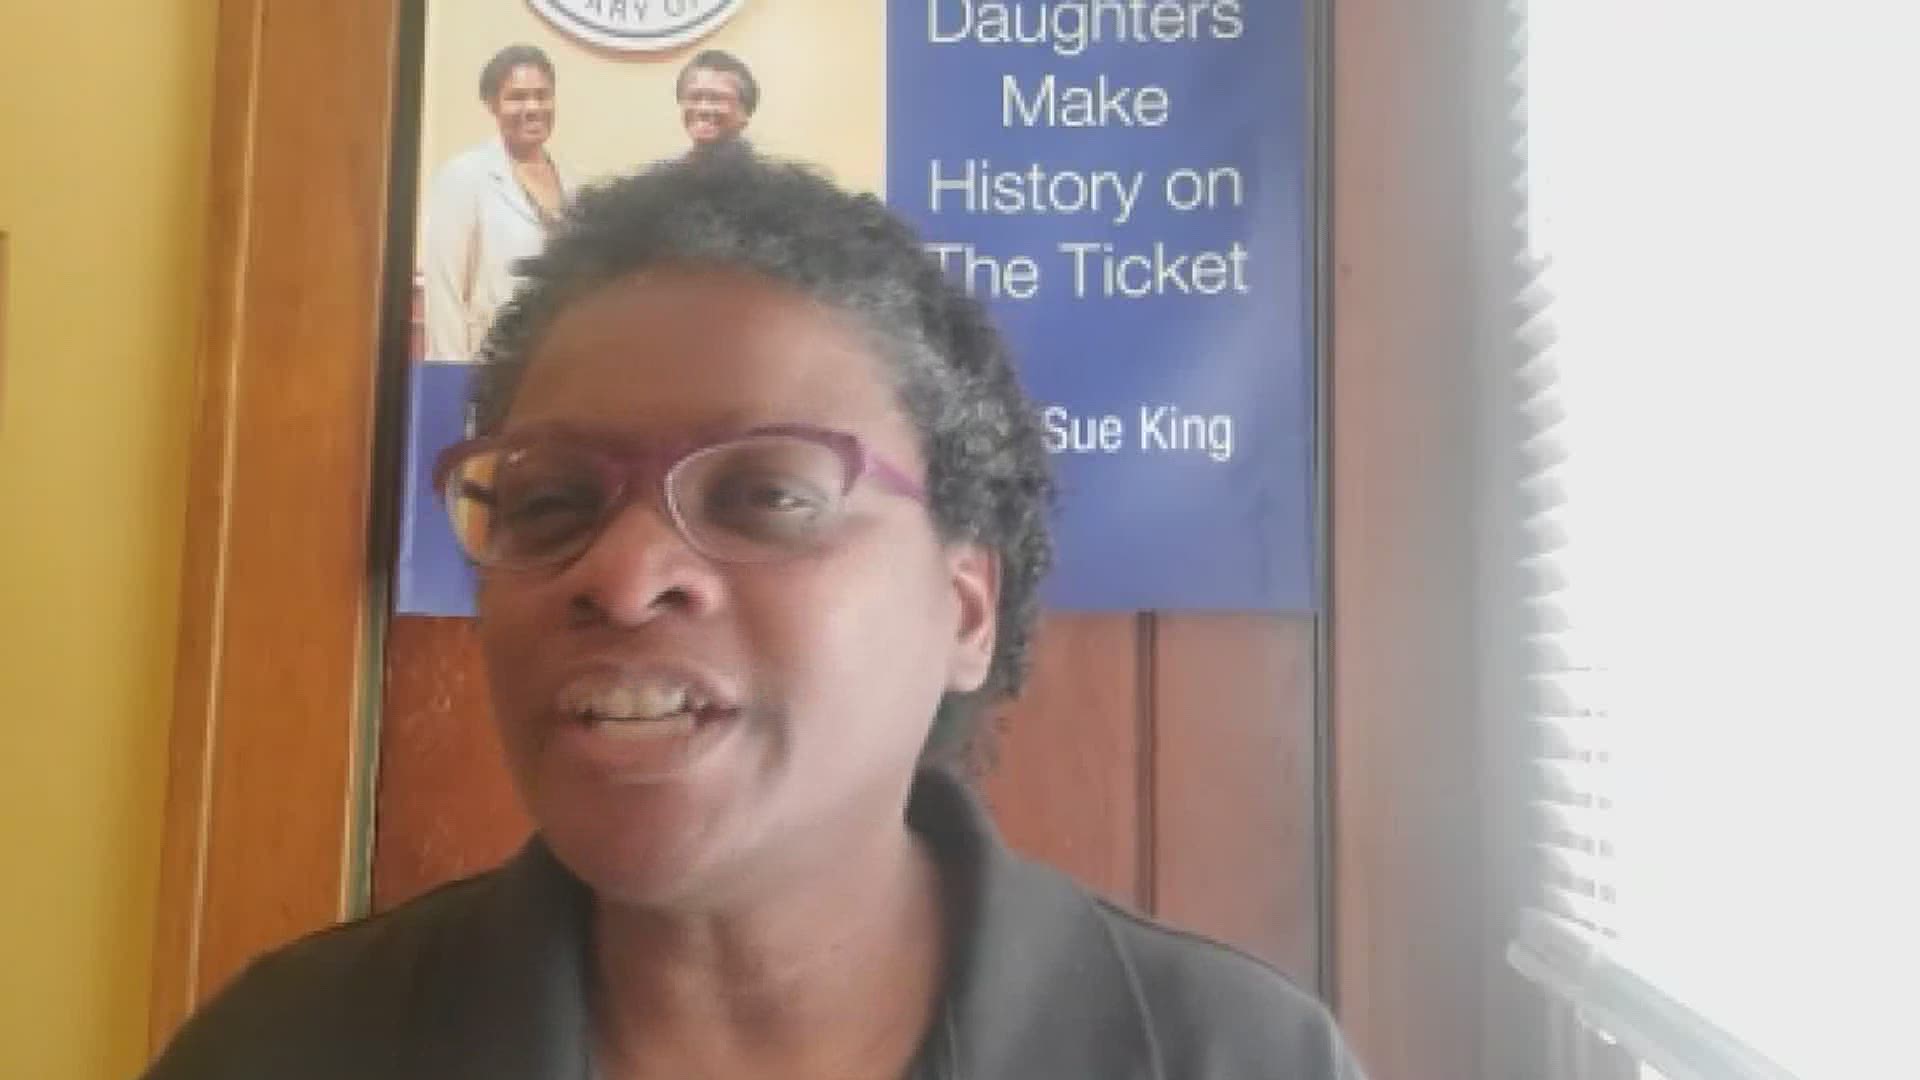 Ricki Sue King is running for president under the Genealogy Know Your Family History party.